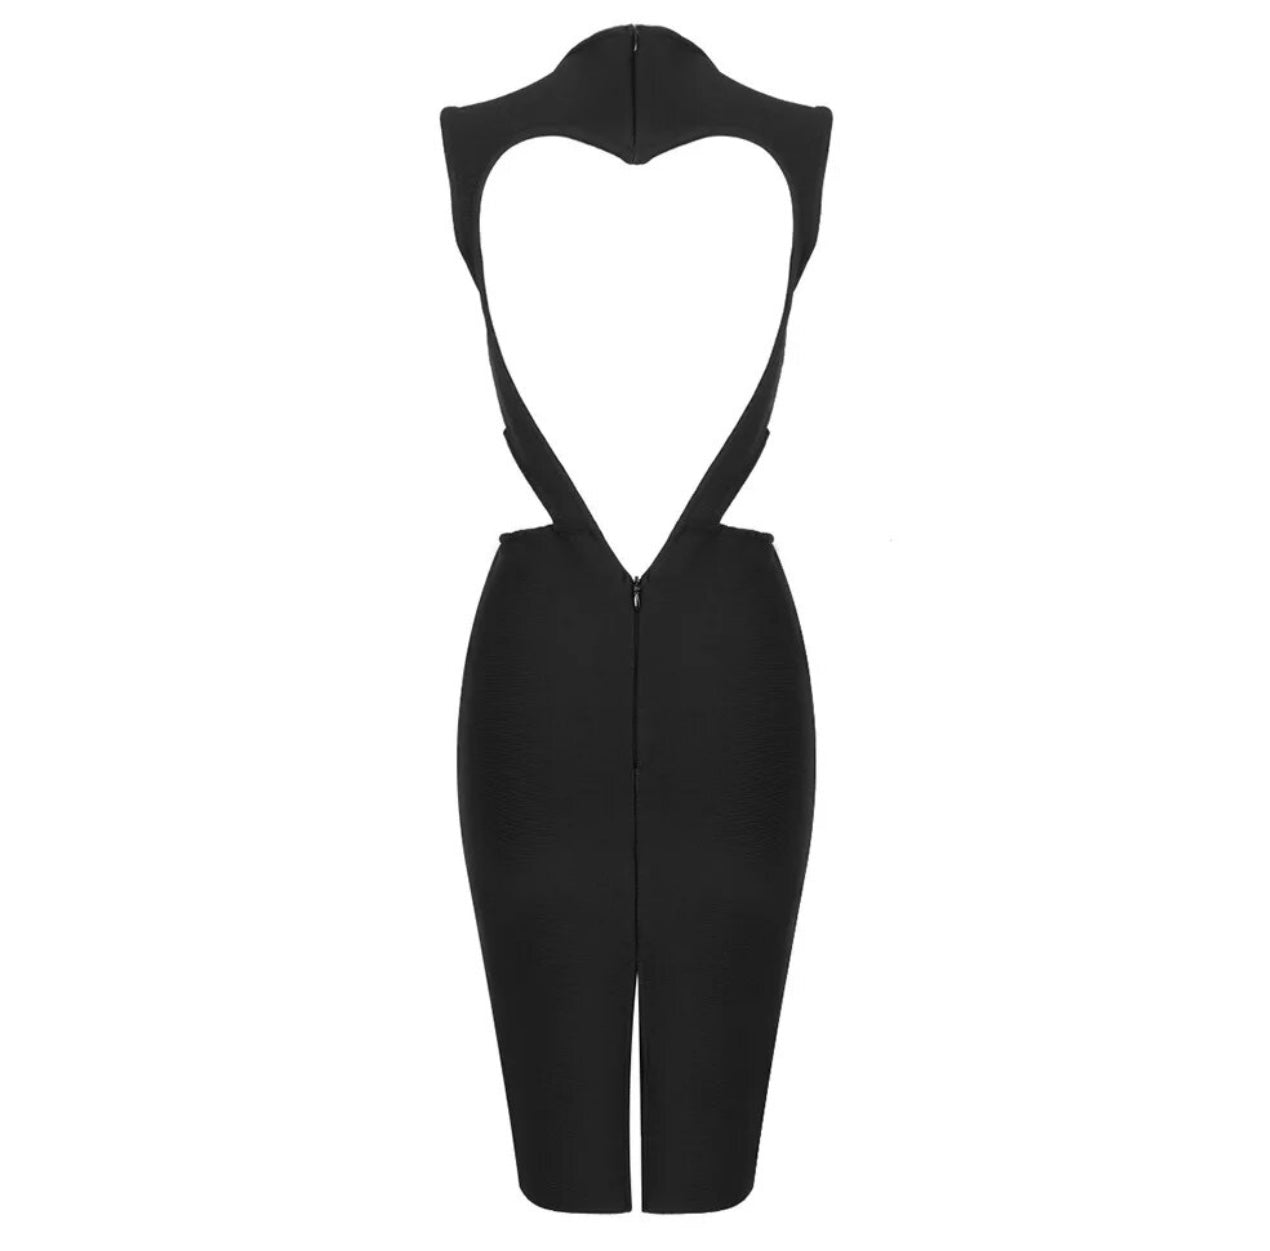 Give Back my  Heart Pencil Dress